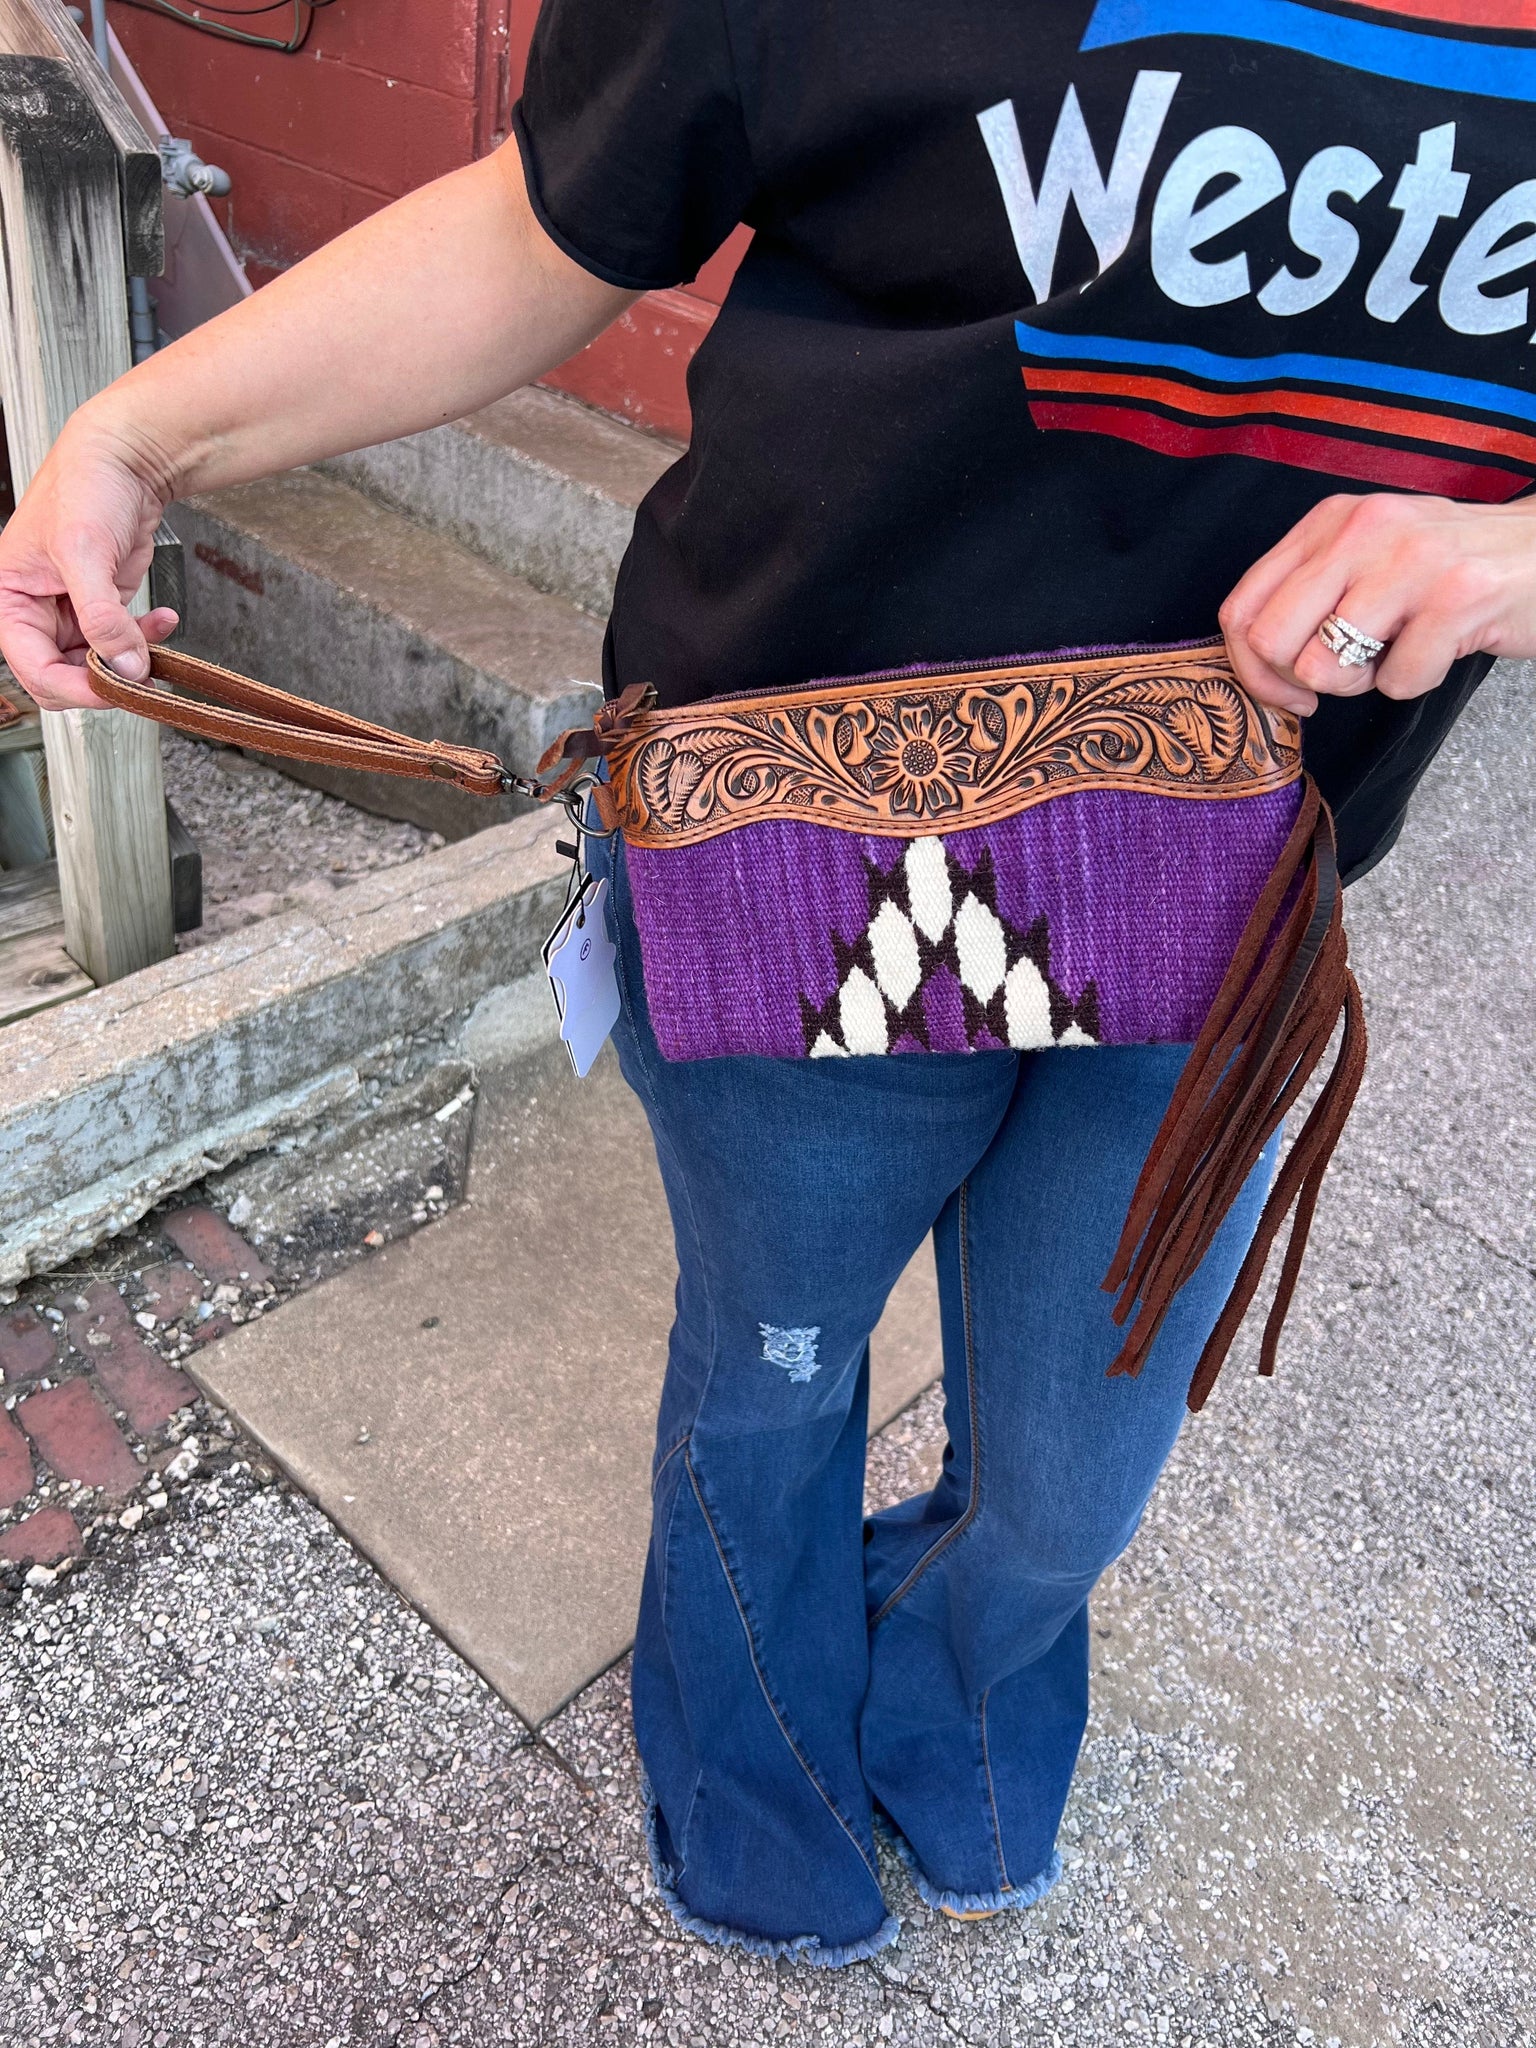 Purple Saddle Blanket with Tooled Leather Wristlet The Sparkly Pig purses